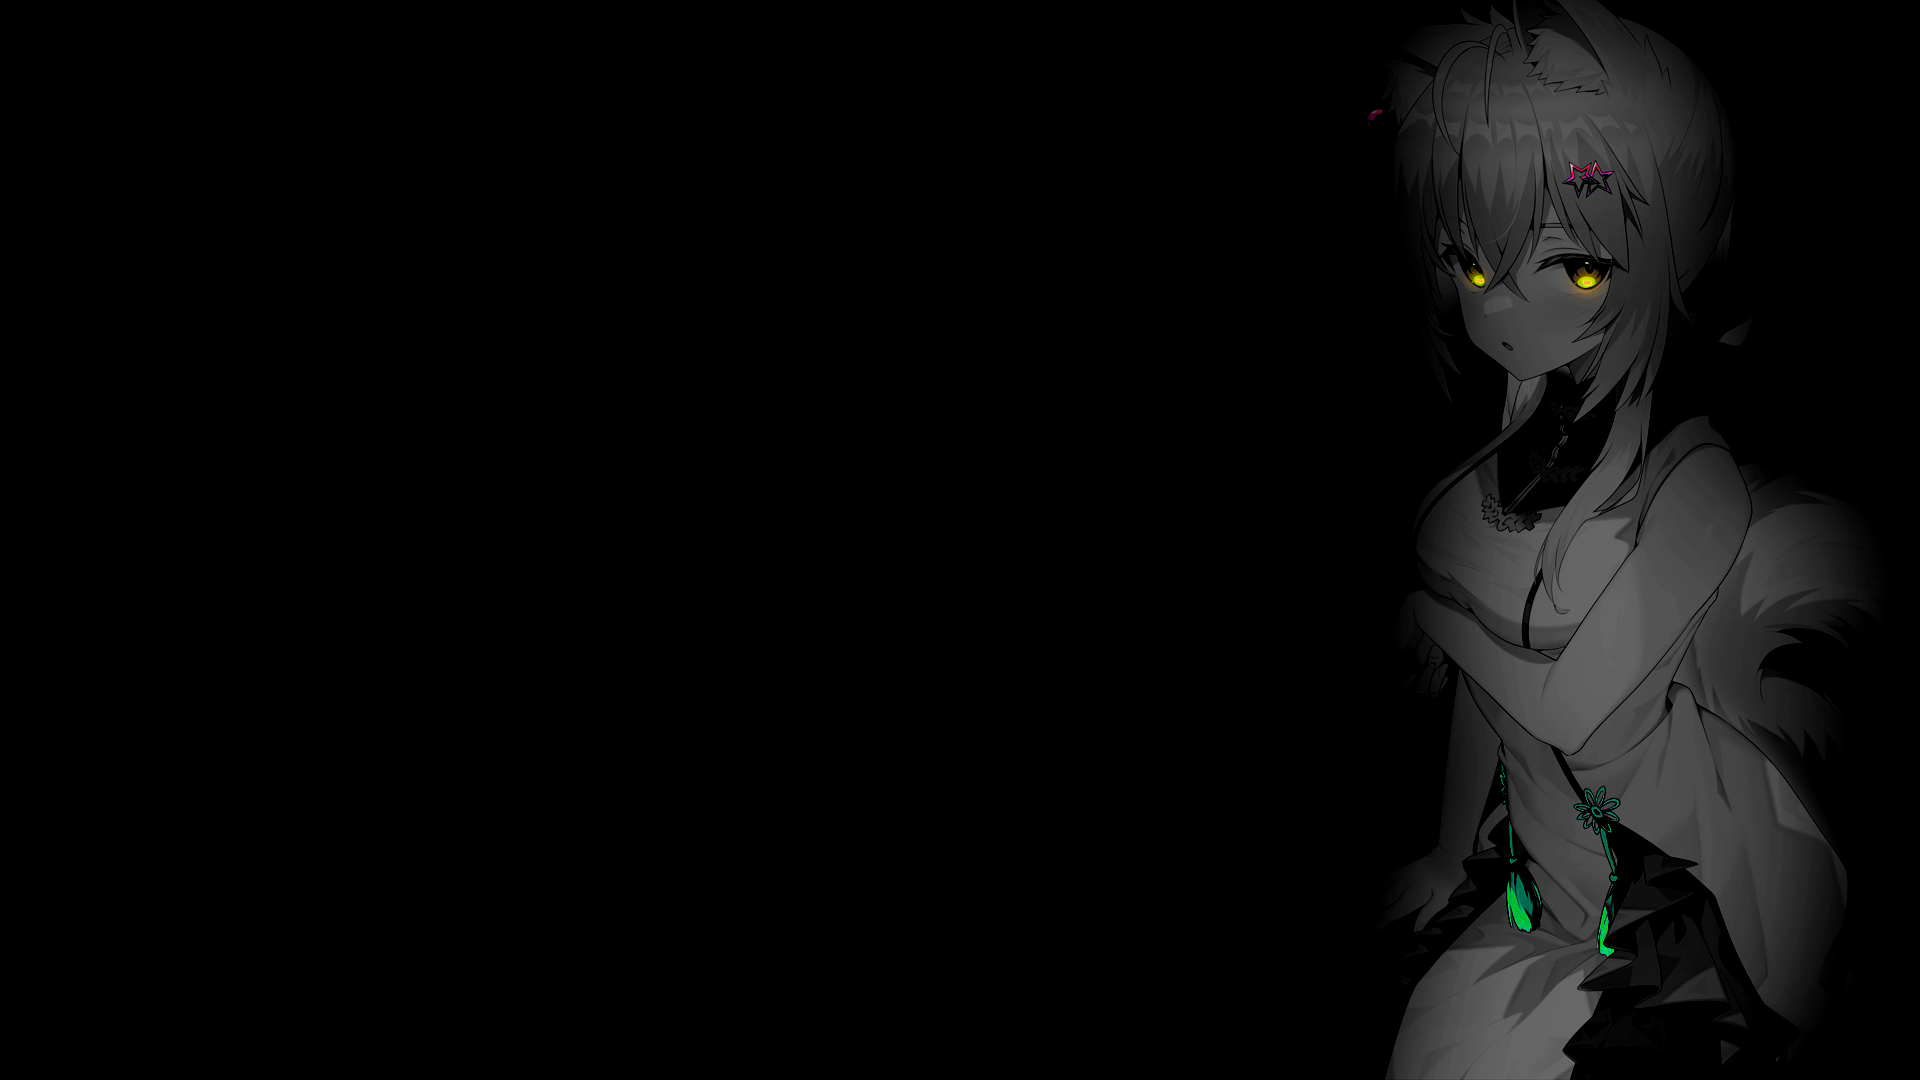 Anime 1920x1080 selective coloring anime girls anime monochrome simple background black background